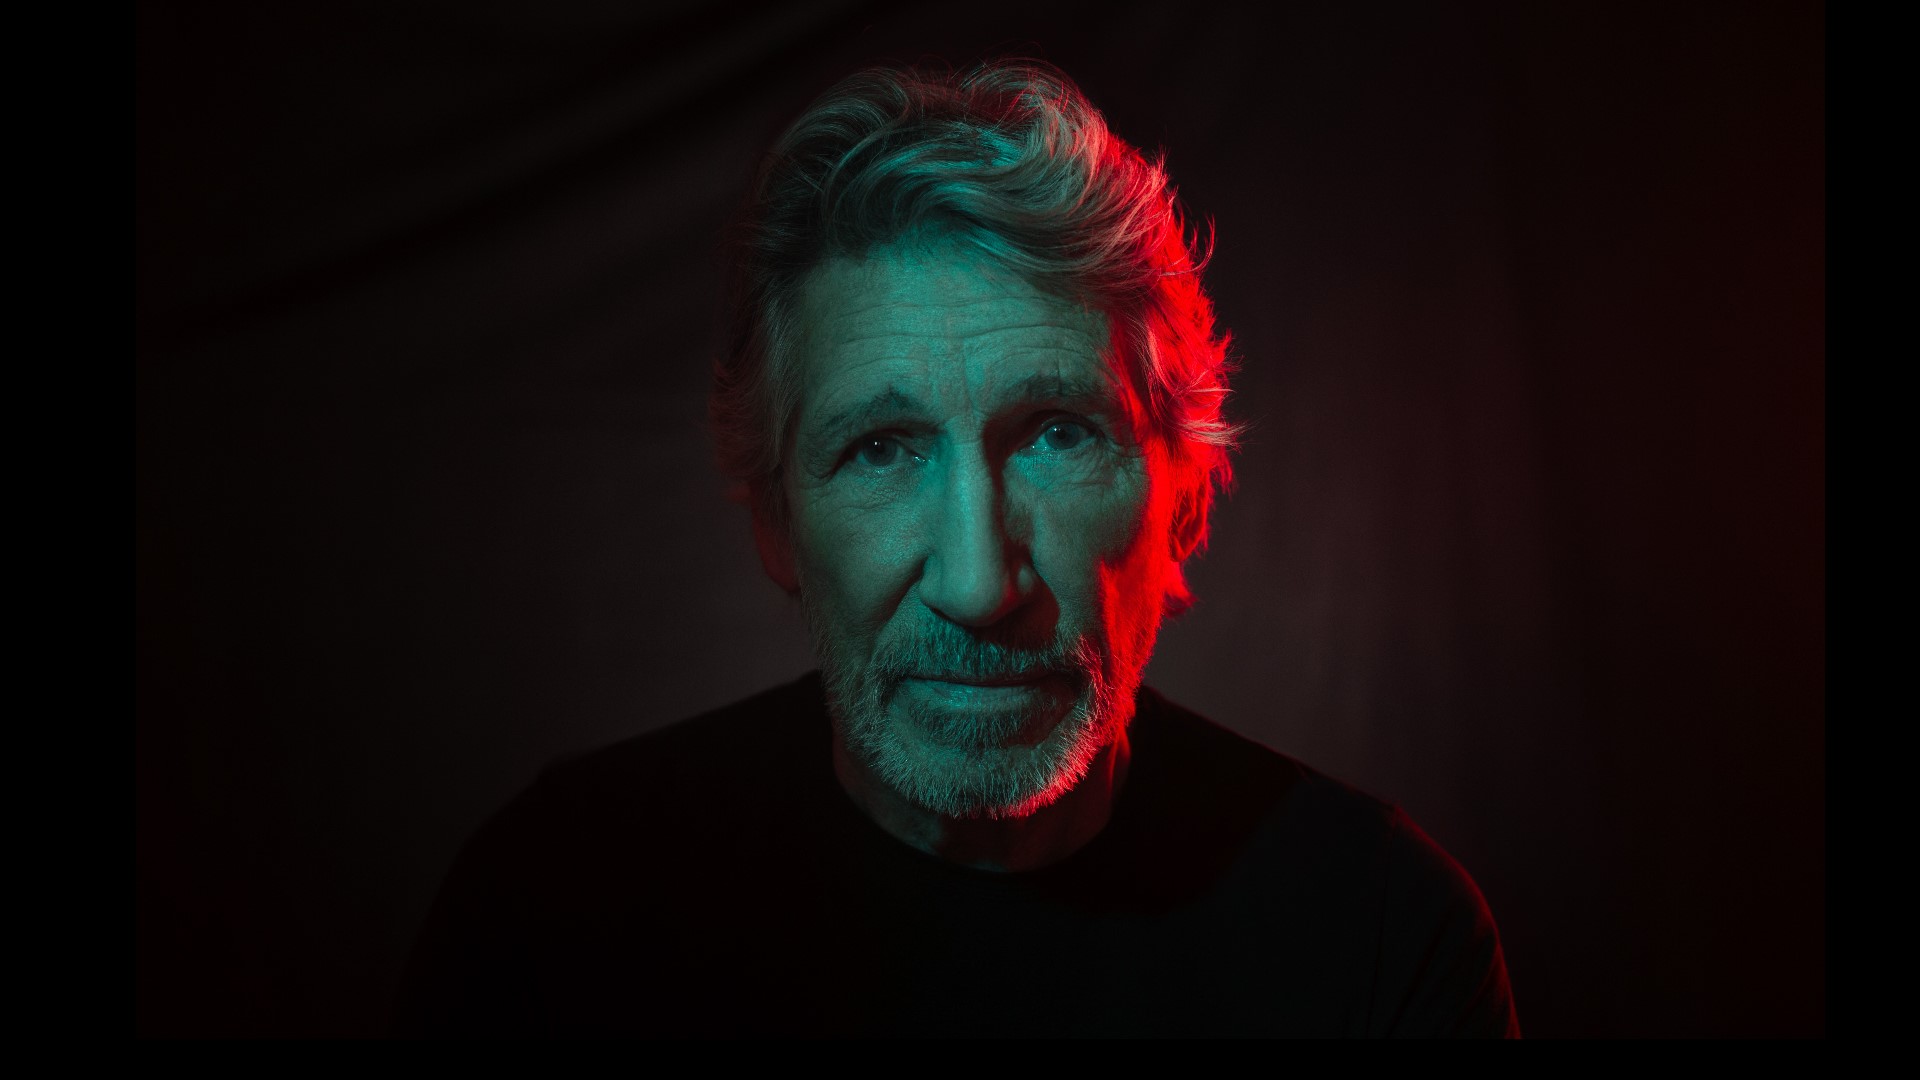 Pink Floyd's Roger Waters will bring his next North American tour to Pepsi Center, Denver, Colorado in September 2020, concert promoter AEG Presents announced.